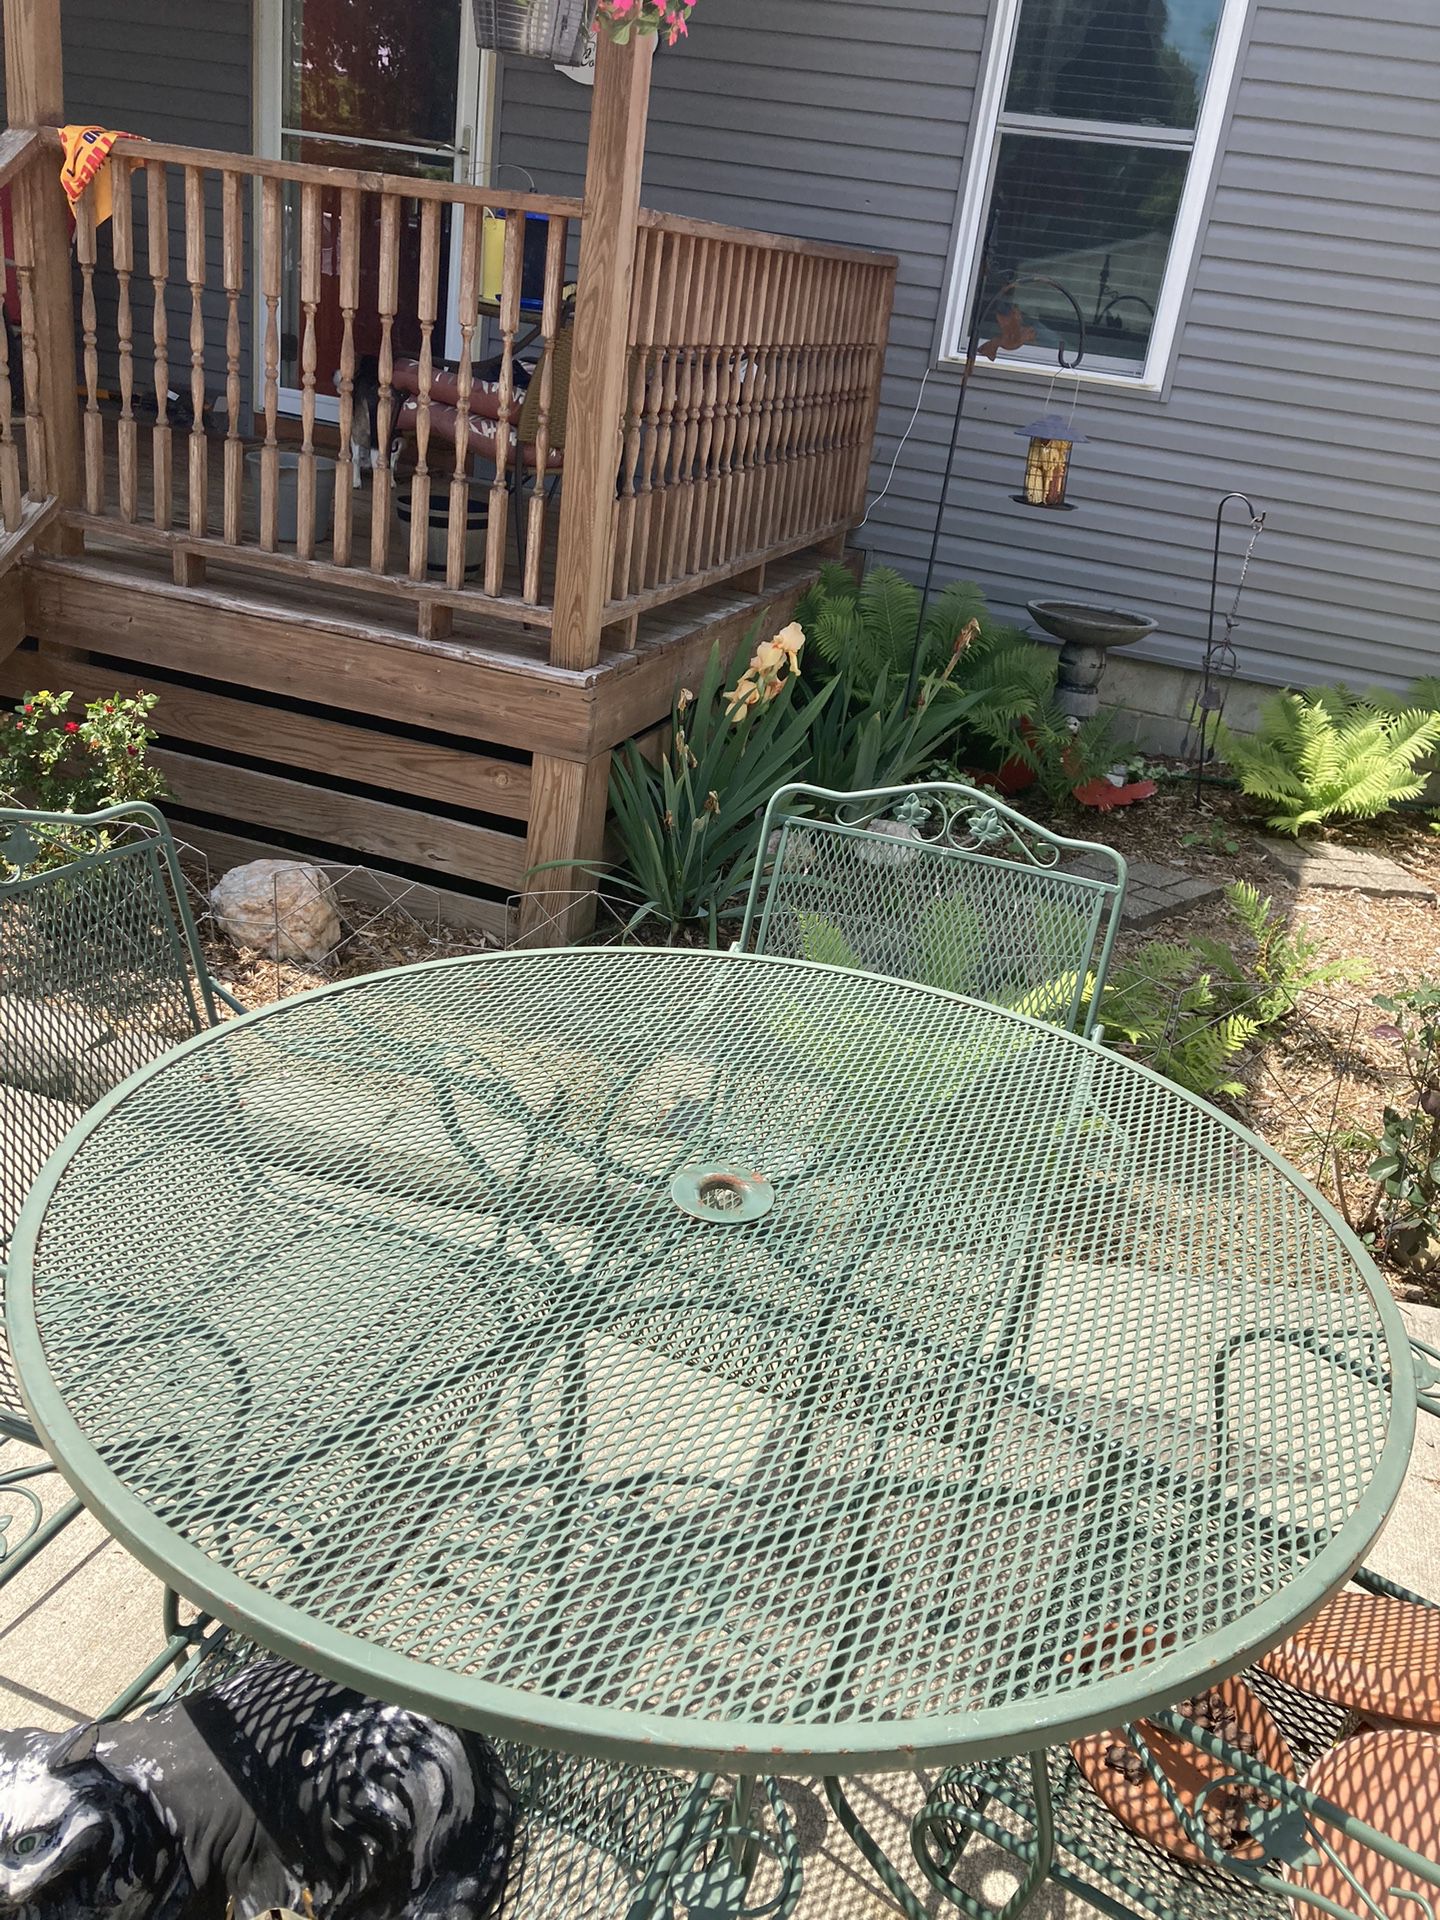 Large 48” Diameter - Round Wrought Iron Table and 4 Chairs. Extremely Nice Set.  $215. OBO